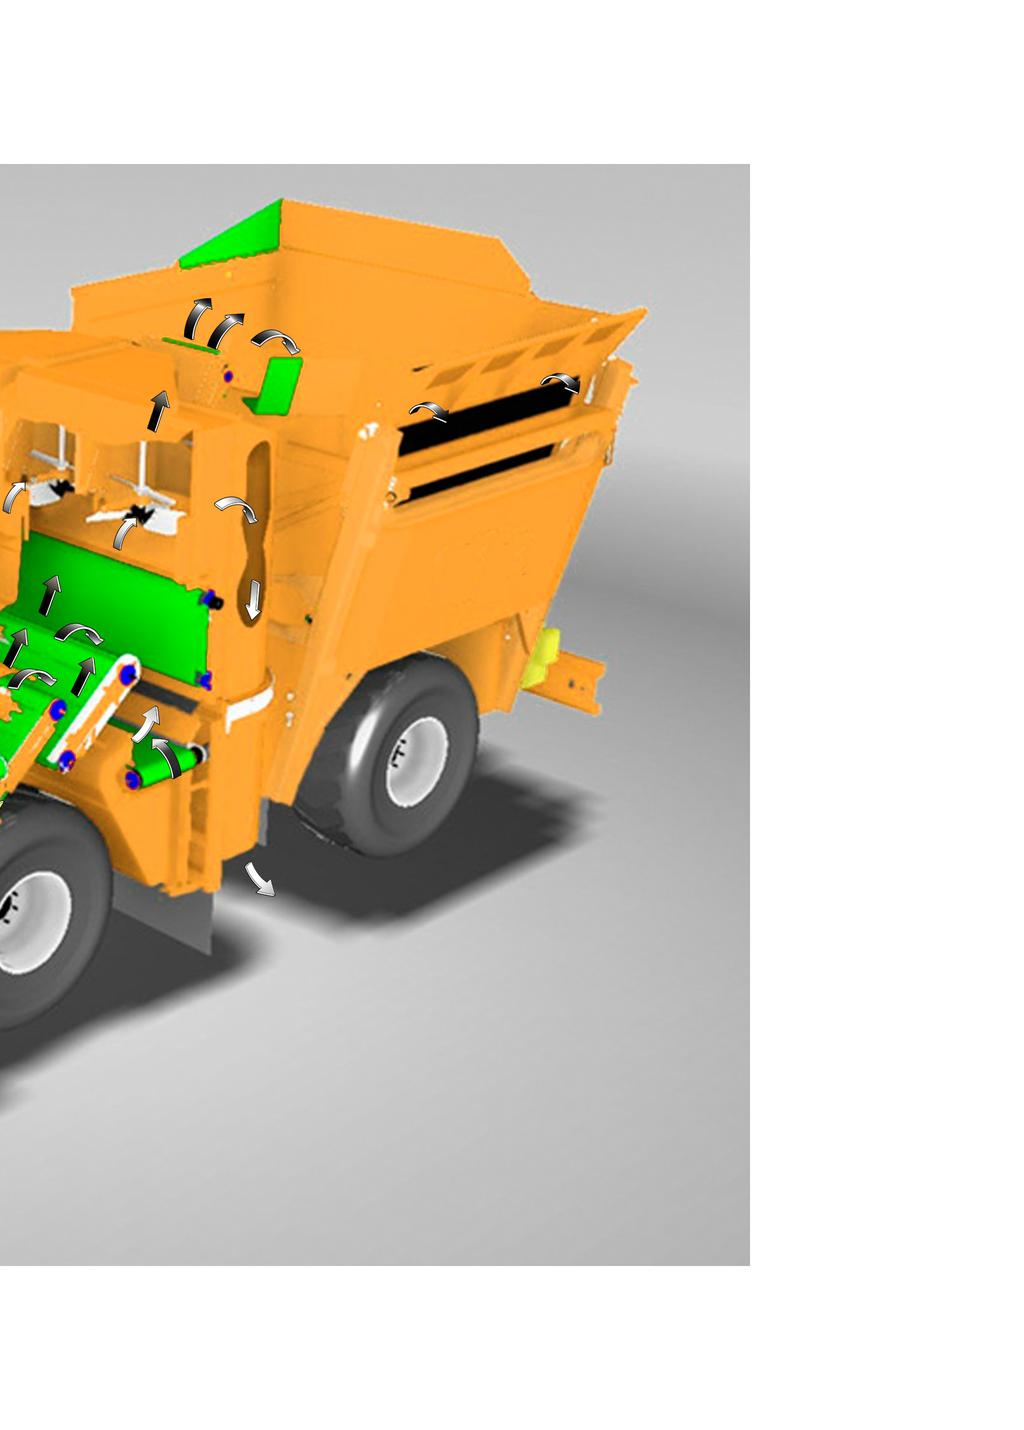 The high capacity hopper has variable discharge height.